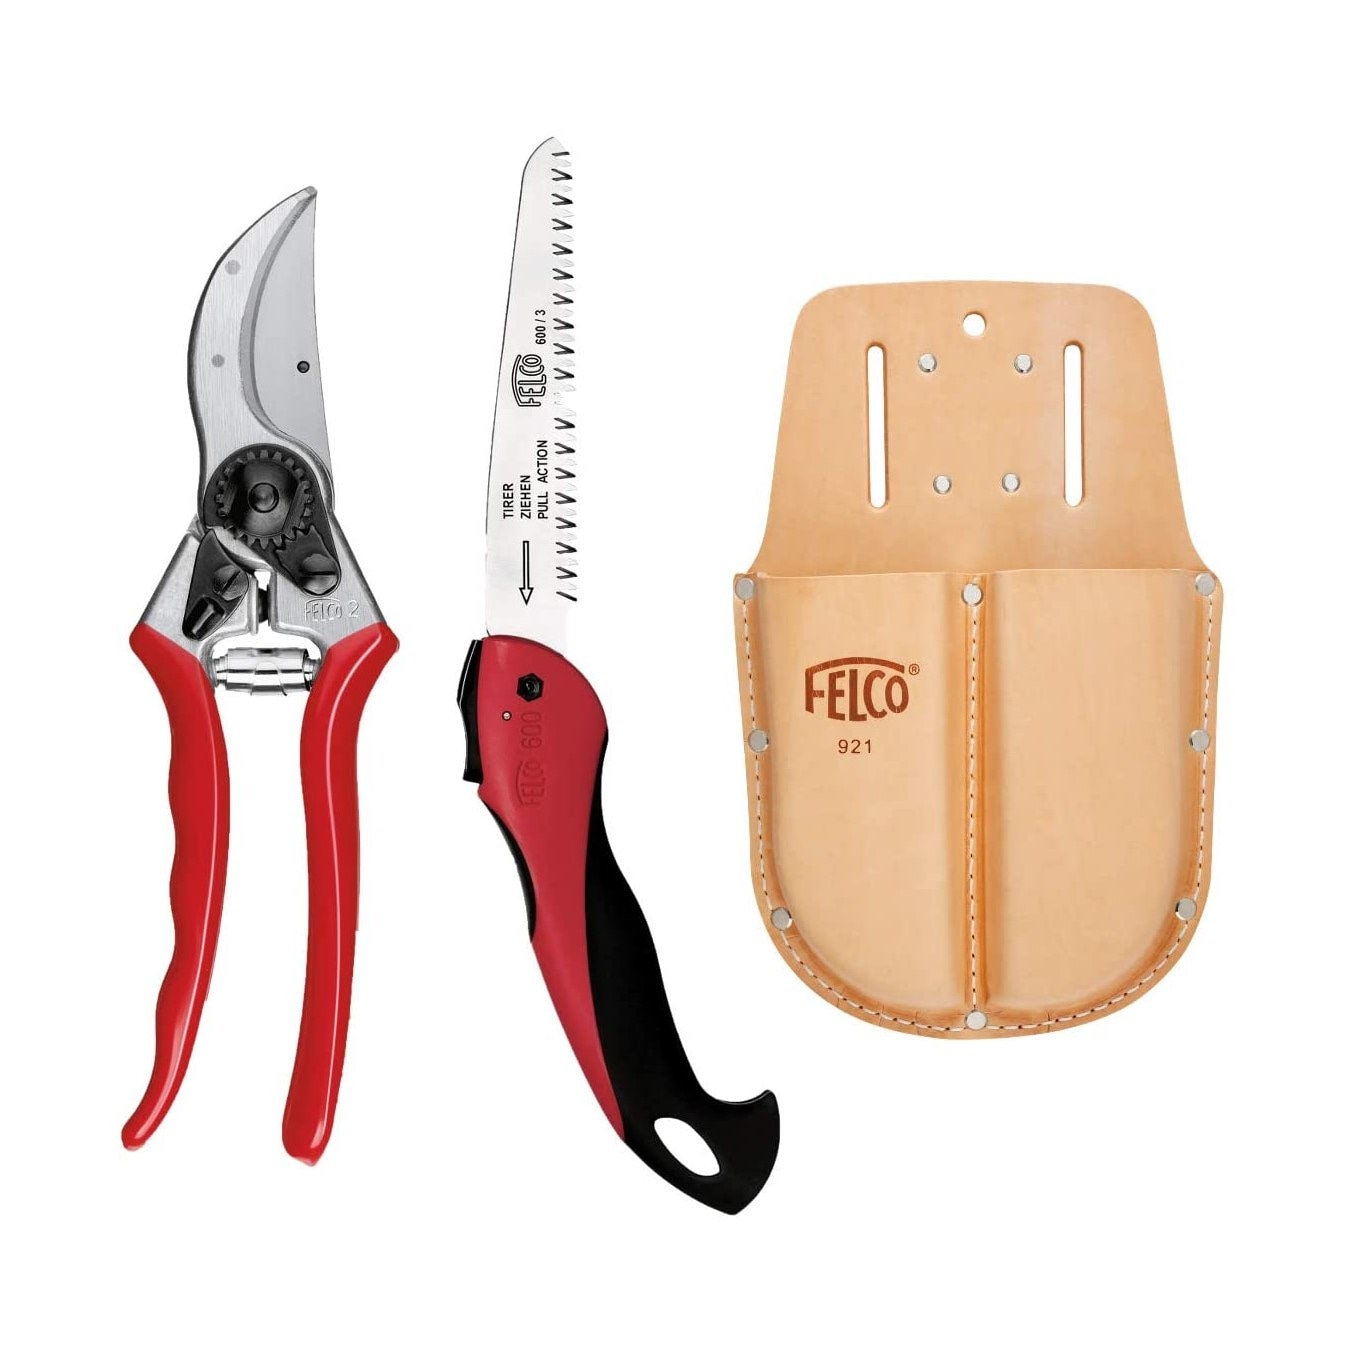 Ijzig Ministerie hop Genuine Felco Model 2 Secateurs With Folding Saw Double - Etsy